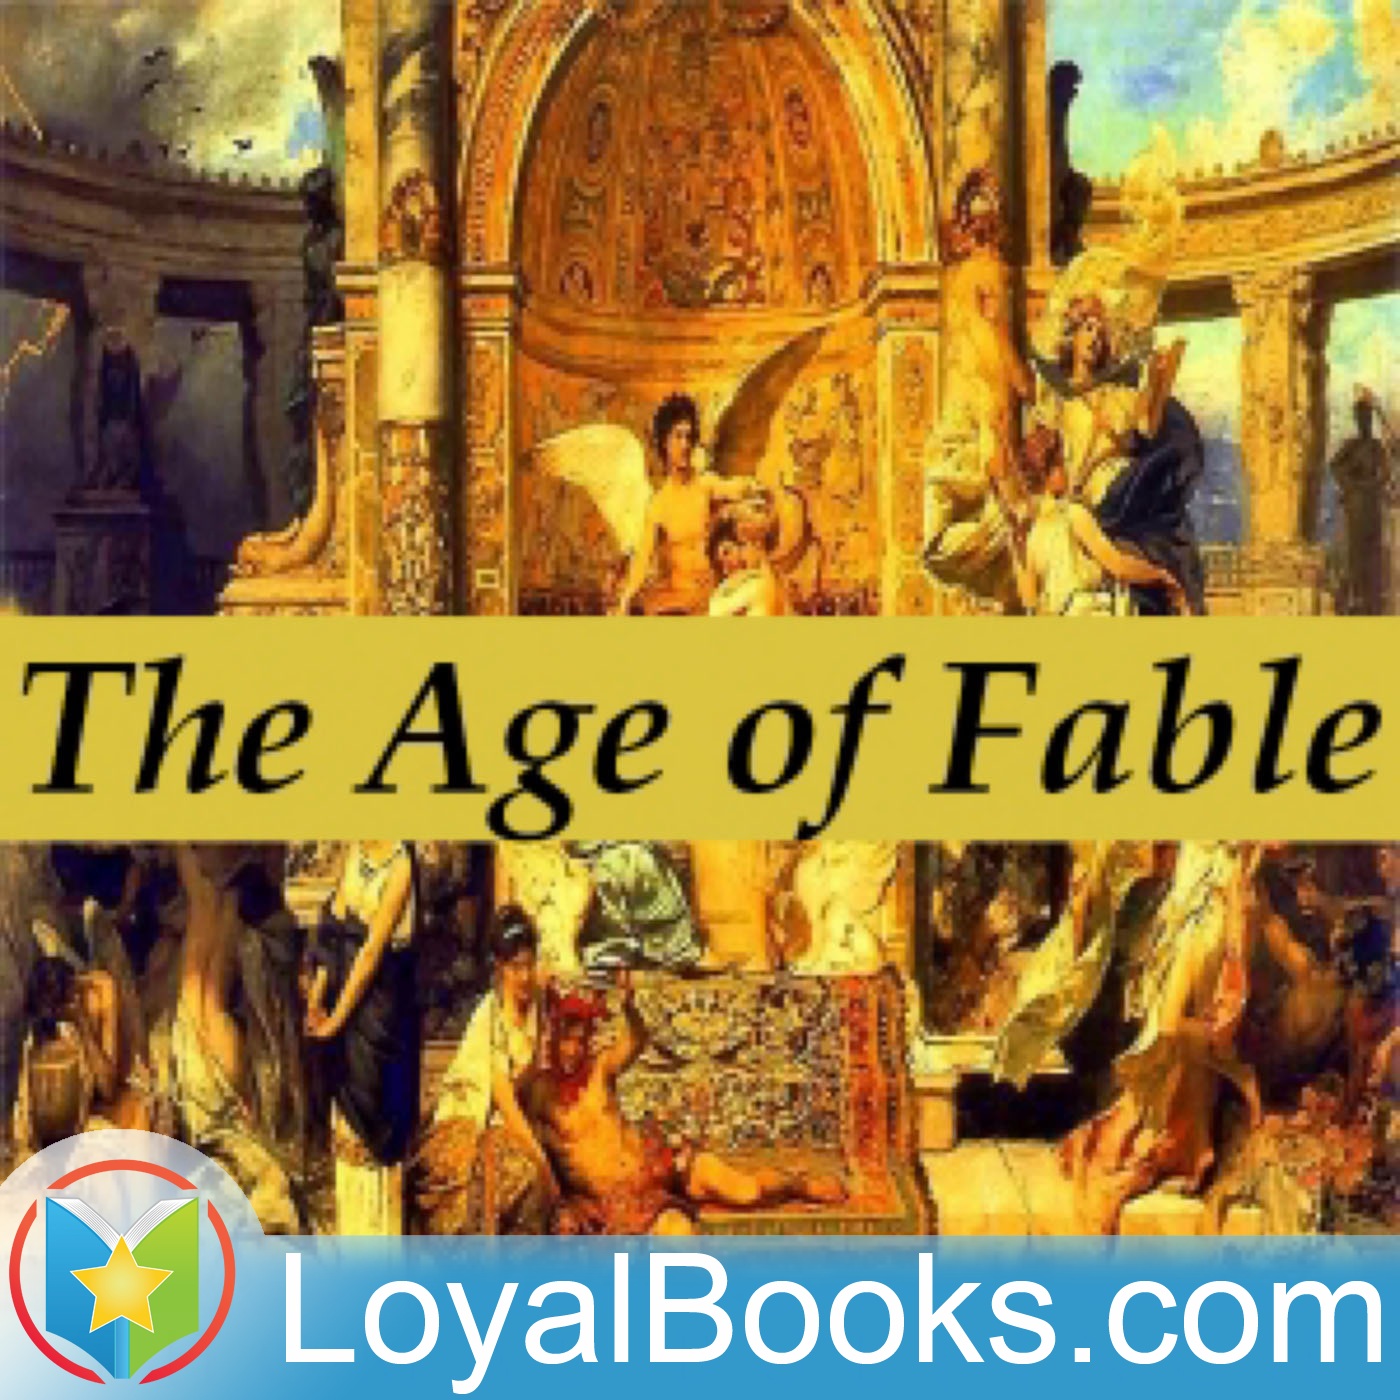 The Age of Fable: Chapter 02